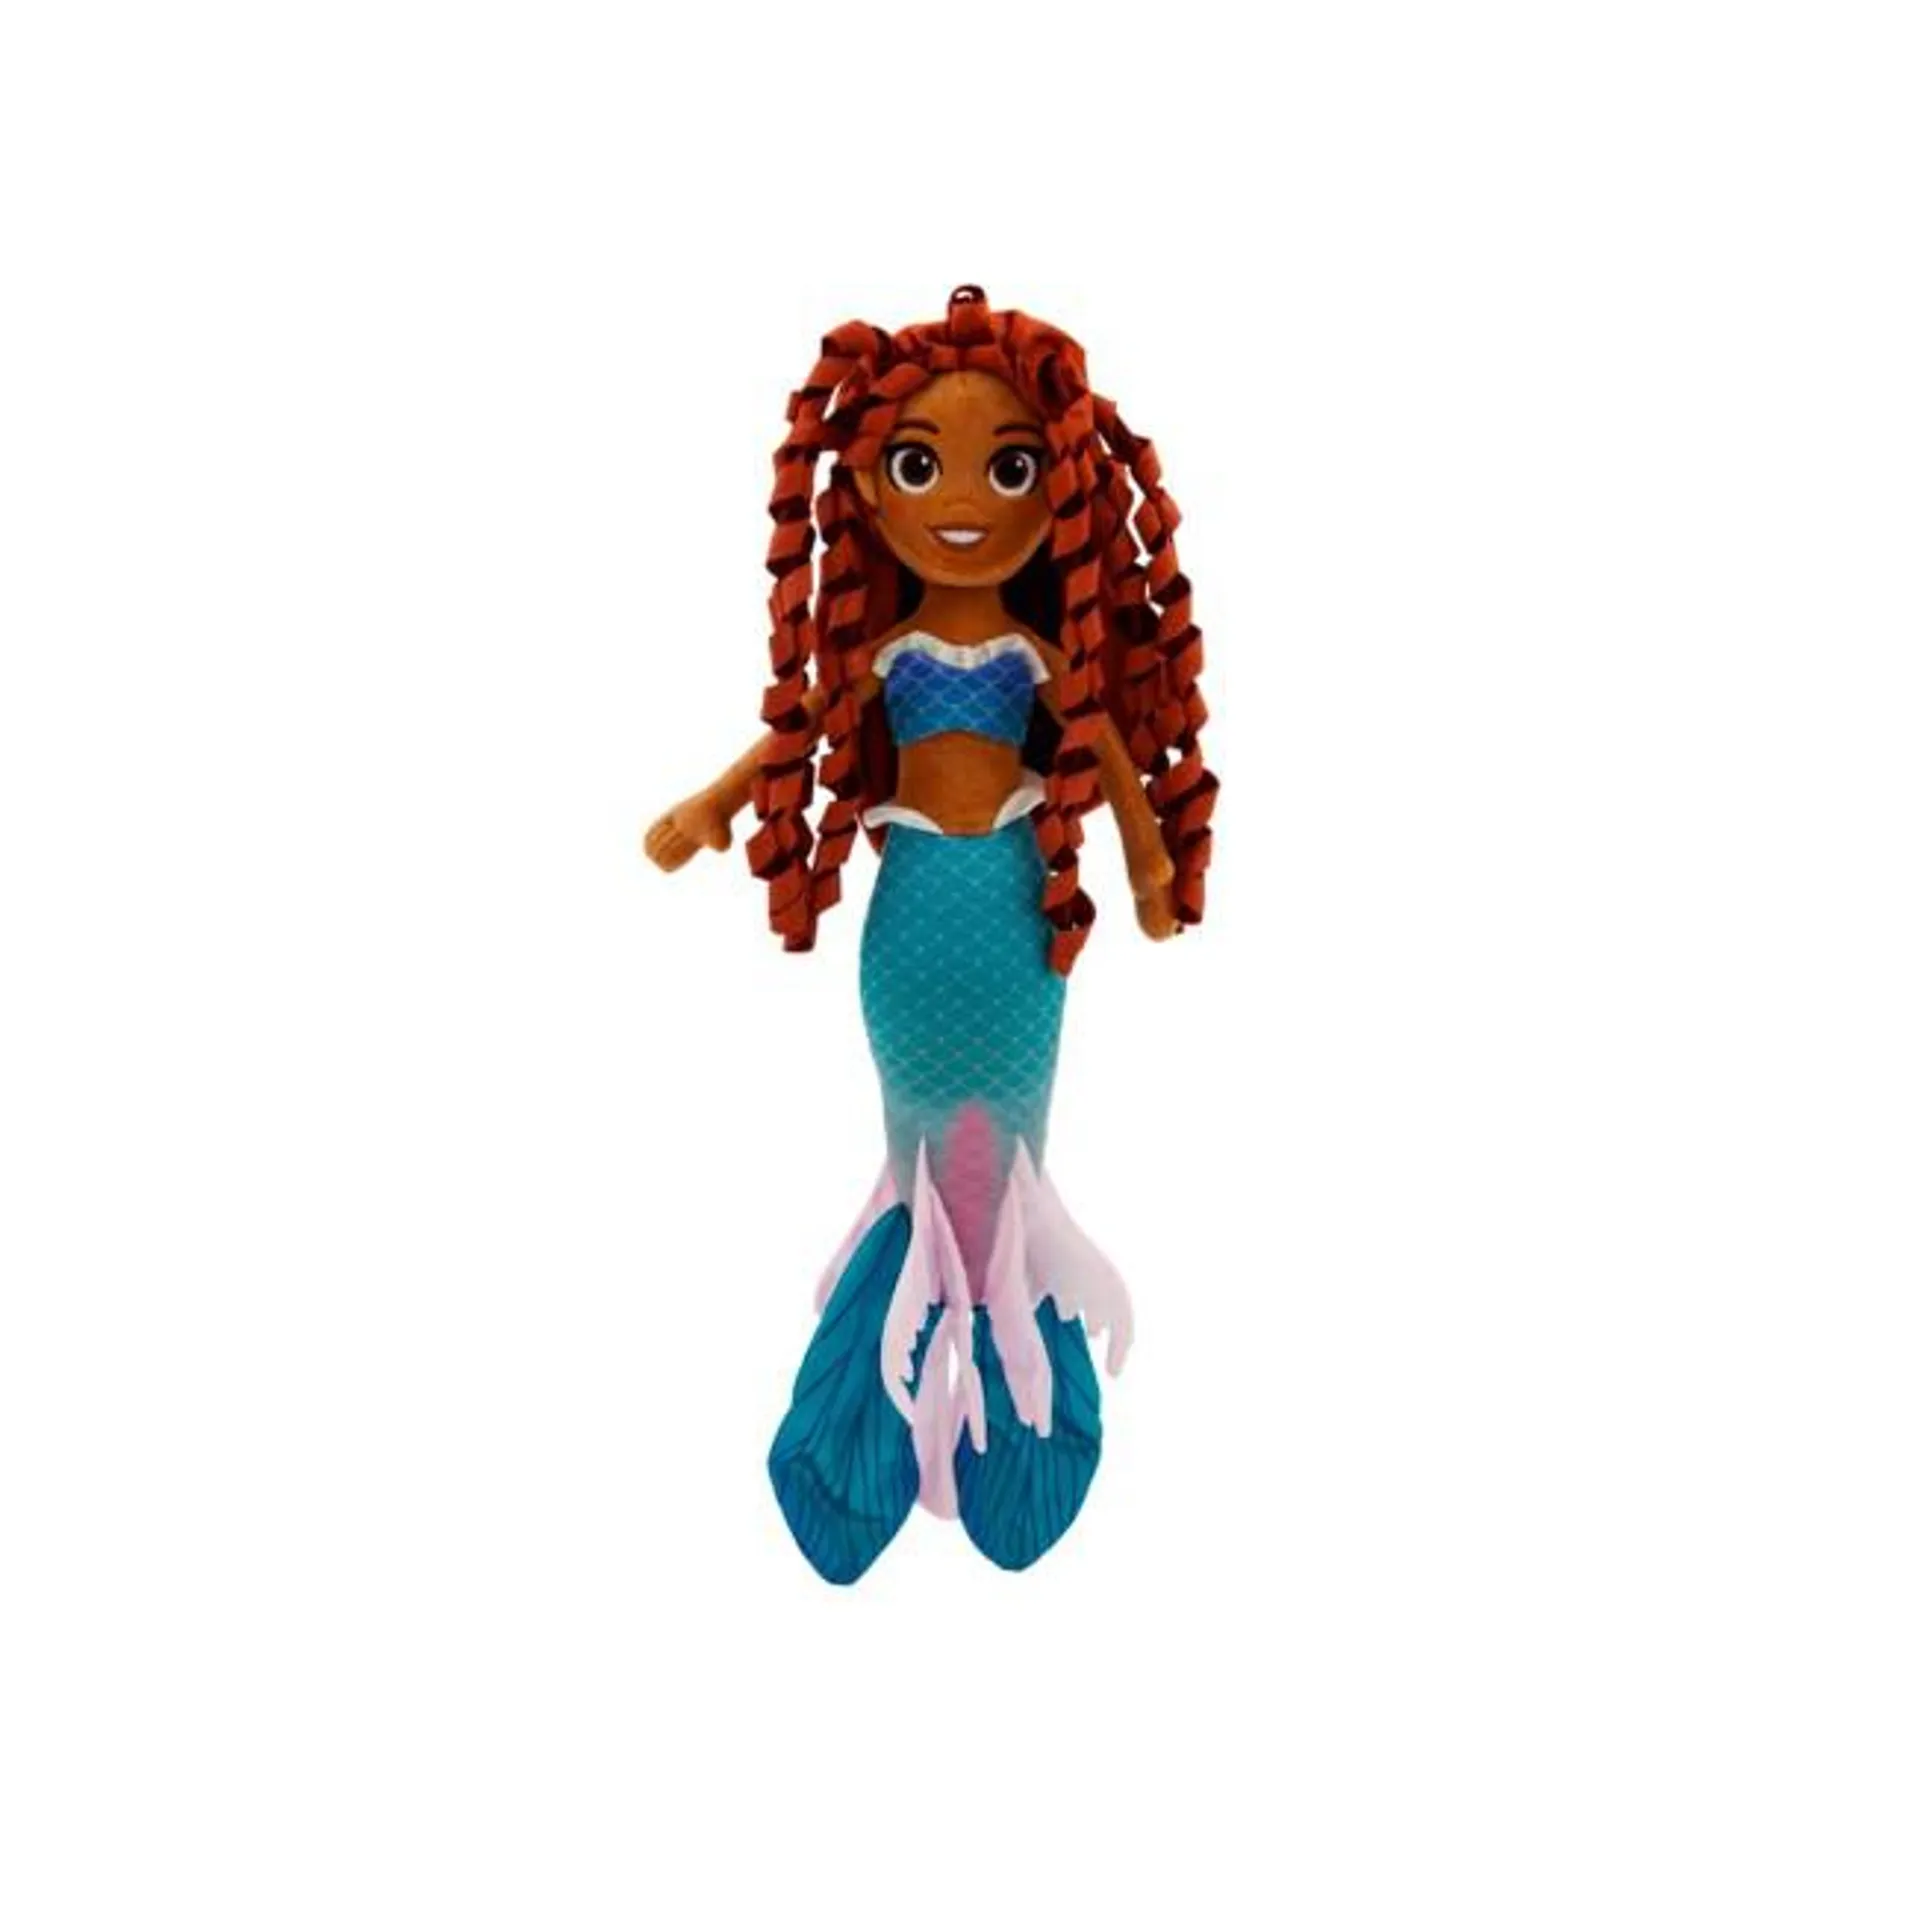 Disney Store Ariel Soft Toy Doll, The Little Mermaid Live Action Film